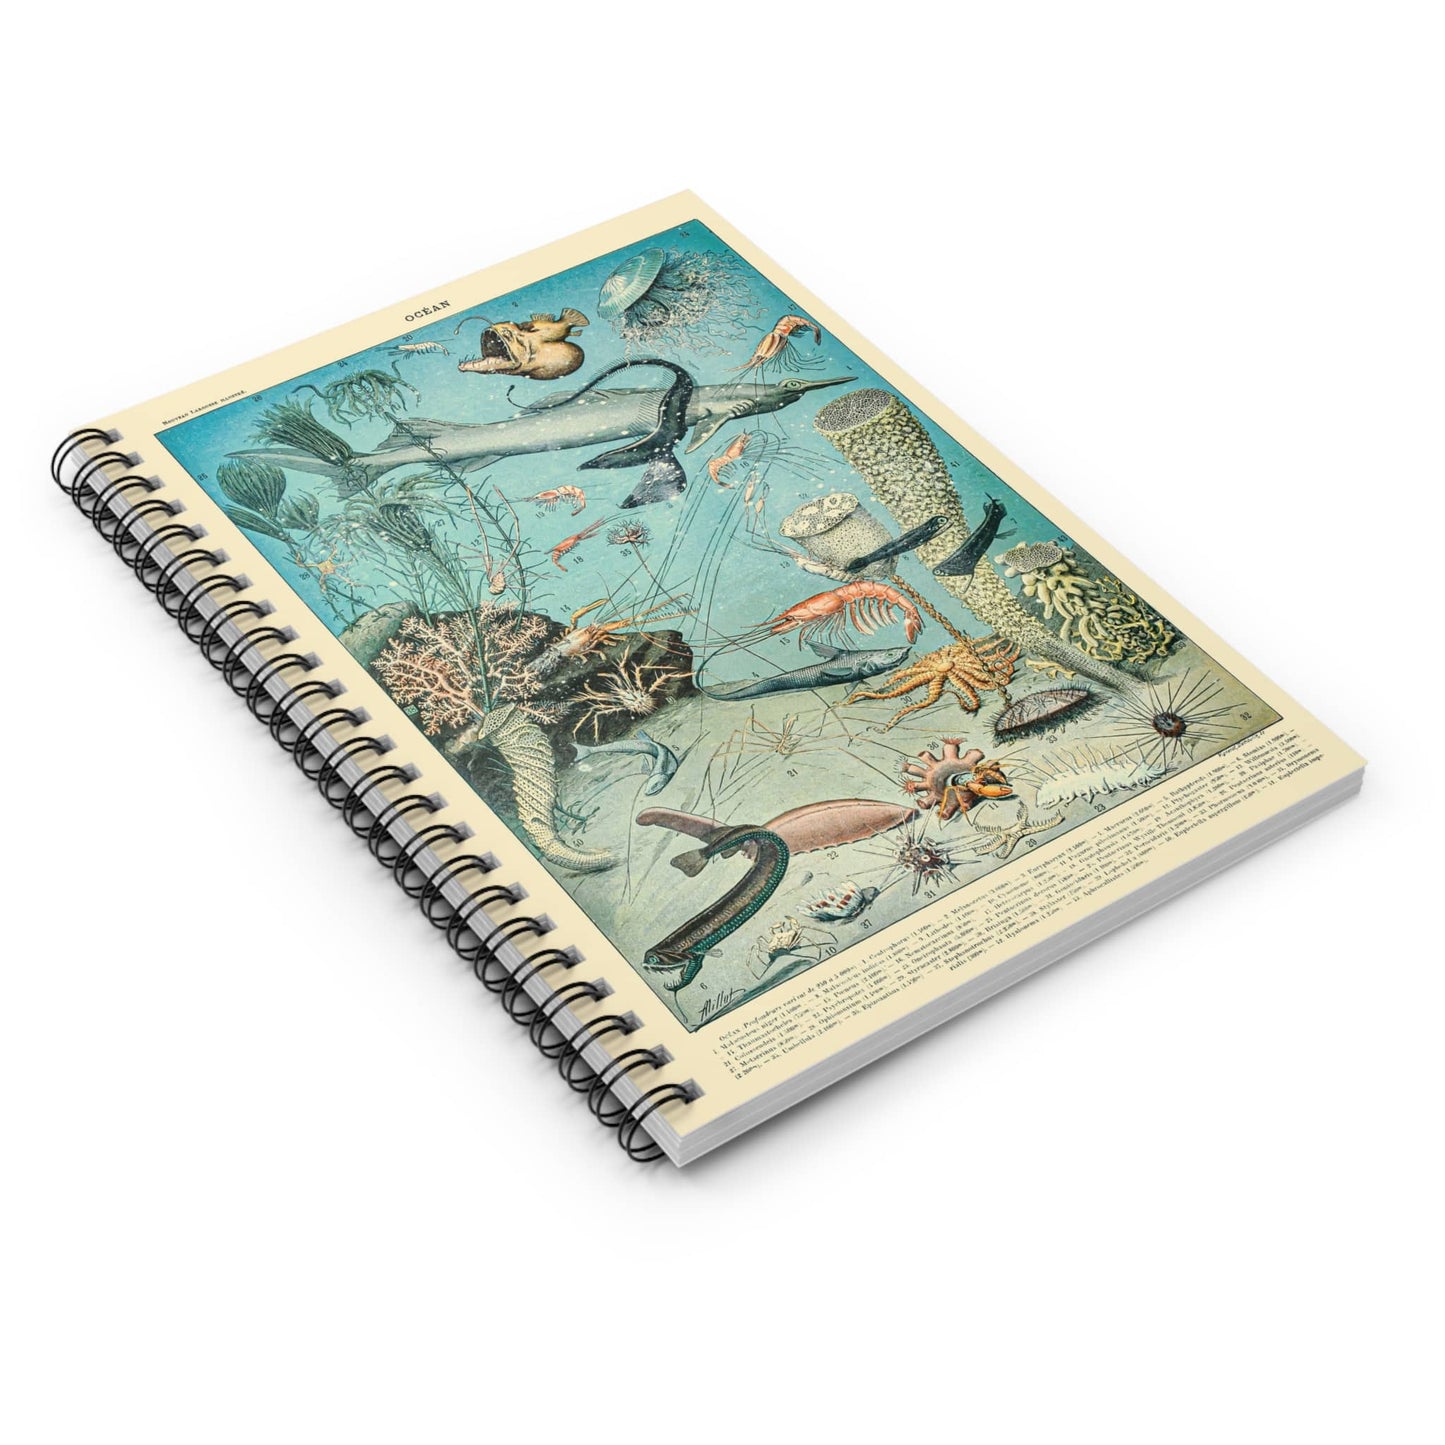 Sea Life Spiral Notebook Laying Flat on White Surface